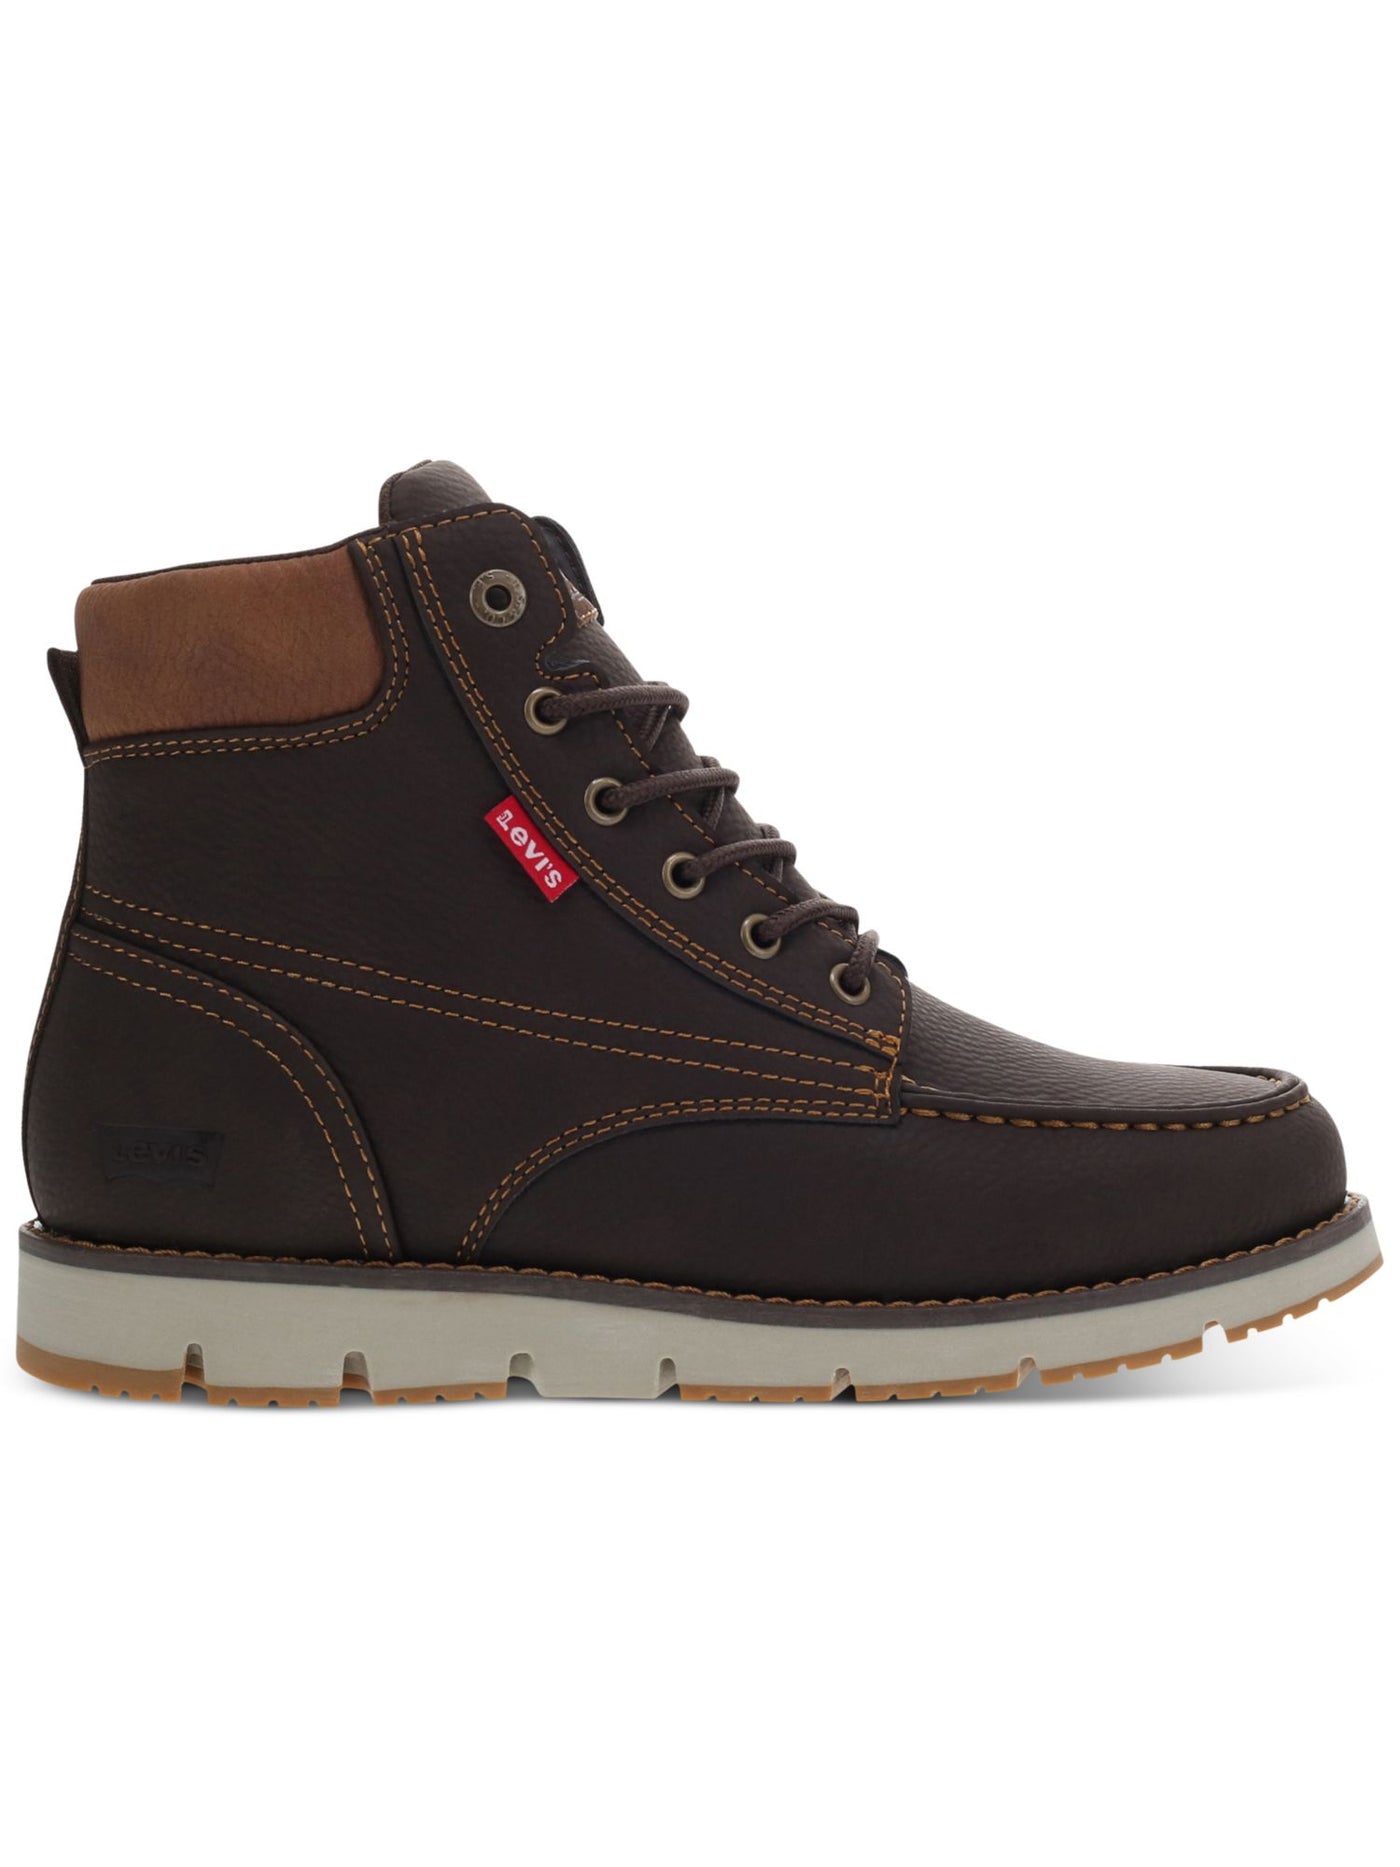 LEVI'S Mens Brown Pull Tab Cushioned Removable Insole Dean Round Toe Wedge Lace-Up Chukka Boots 9.5